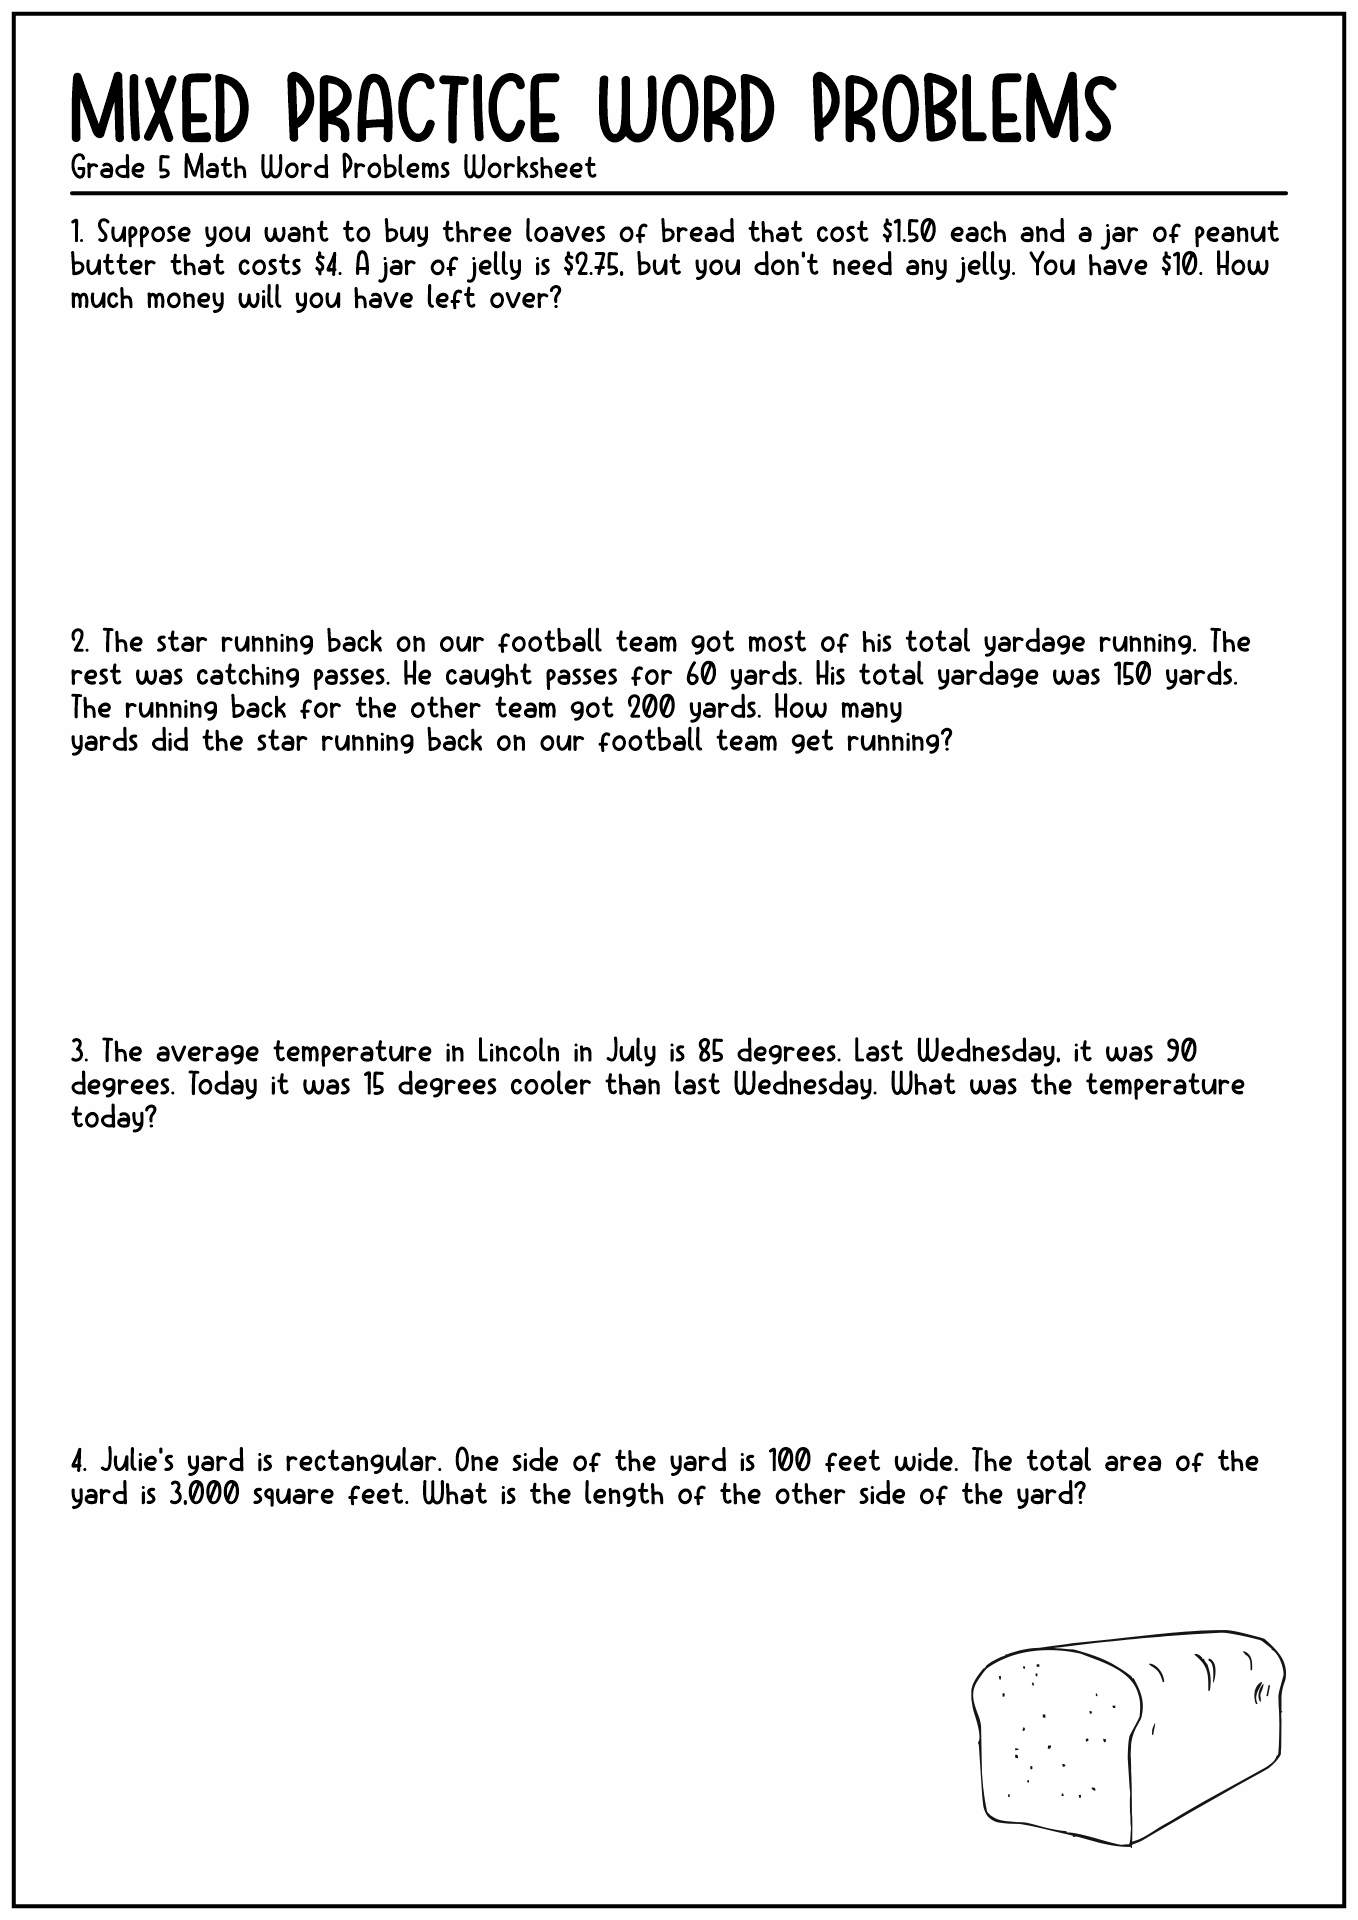 5th Grade Math Word Problems Worksheets Image